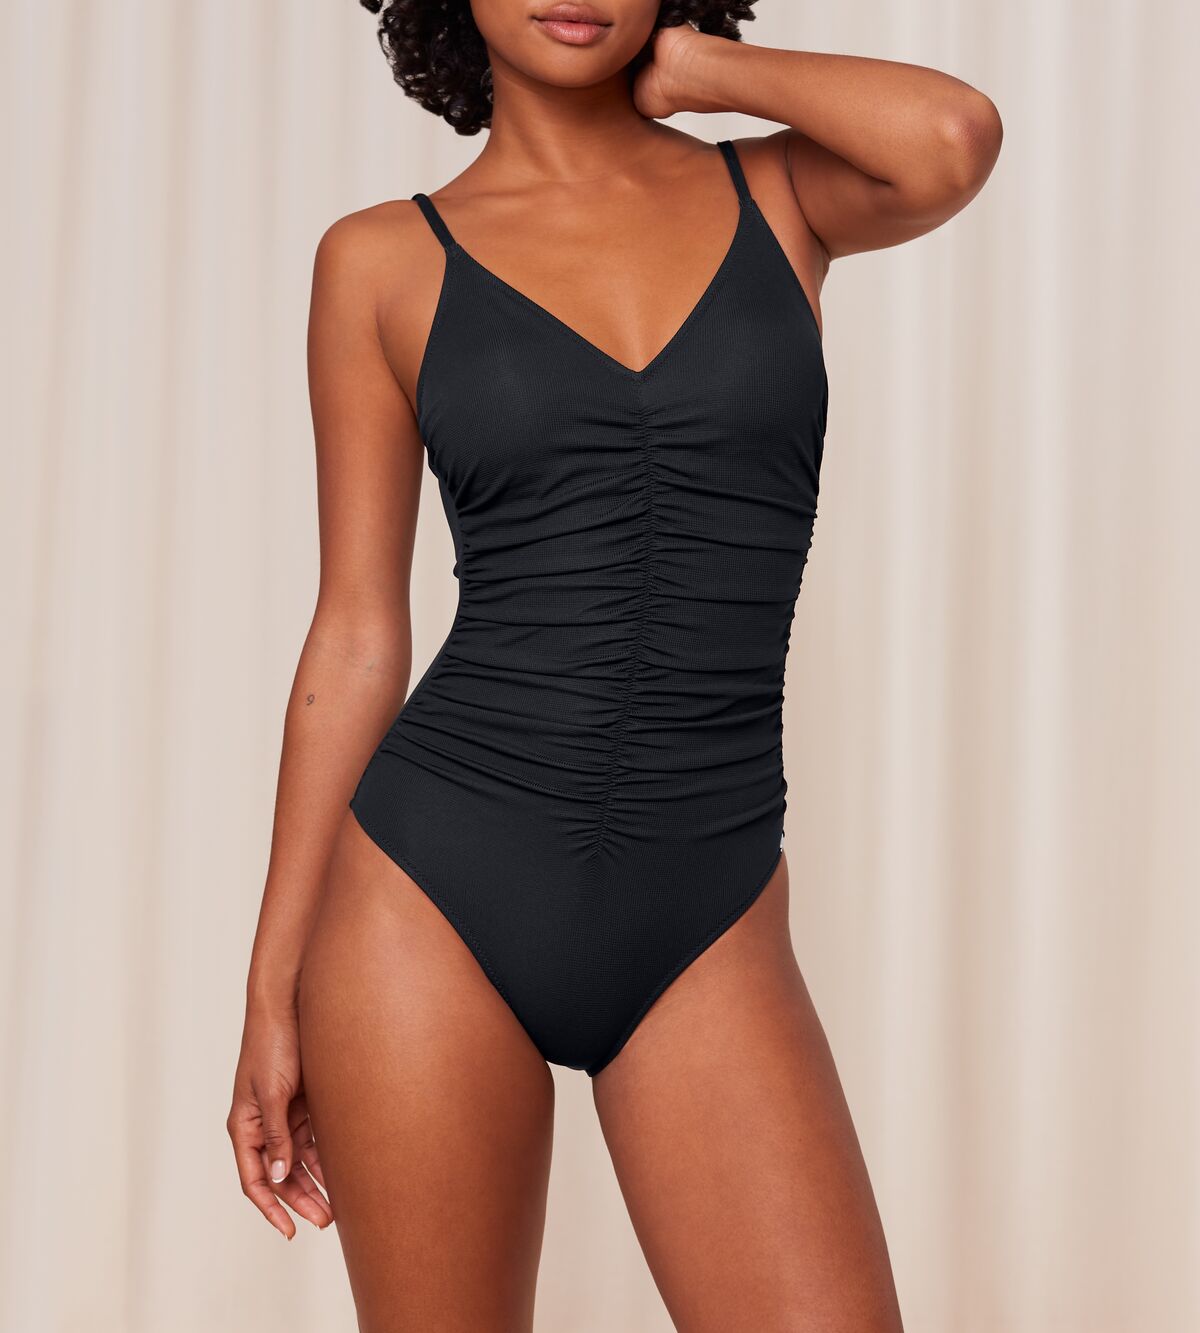 Triumph Summer Glow Padded Swimsuit - Black 2 Shaws Department Stores